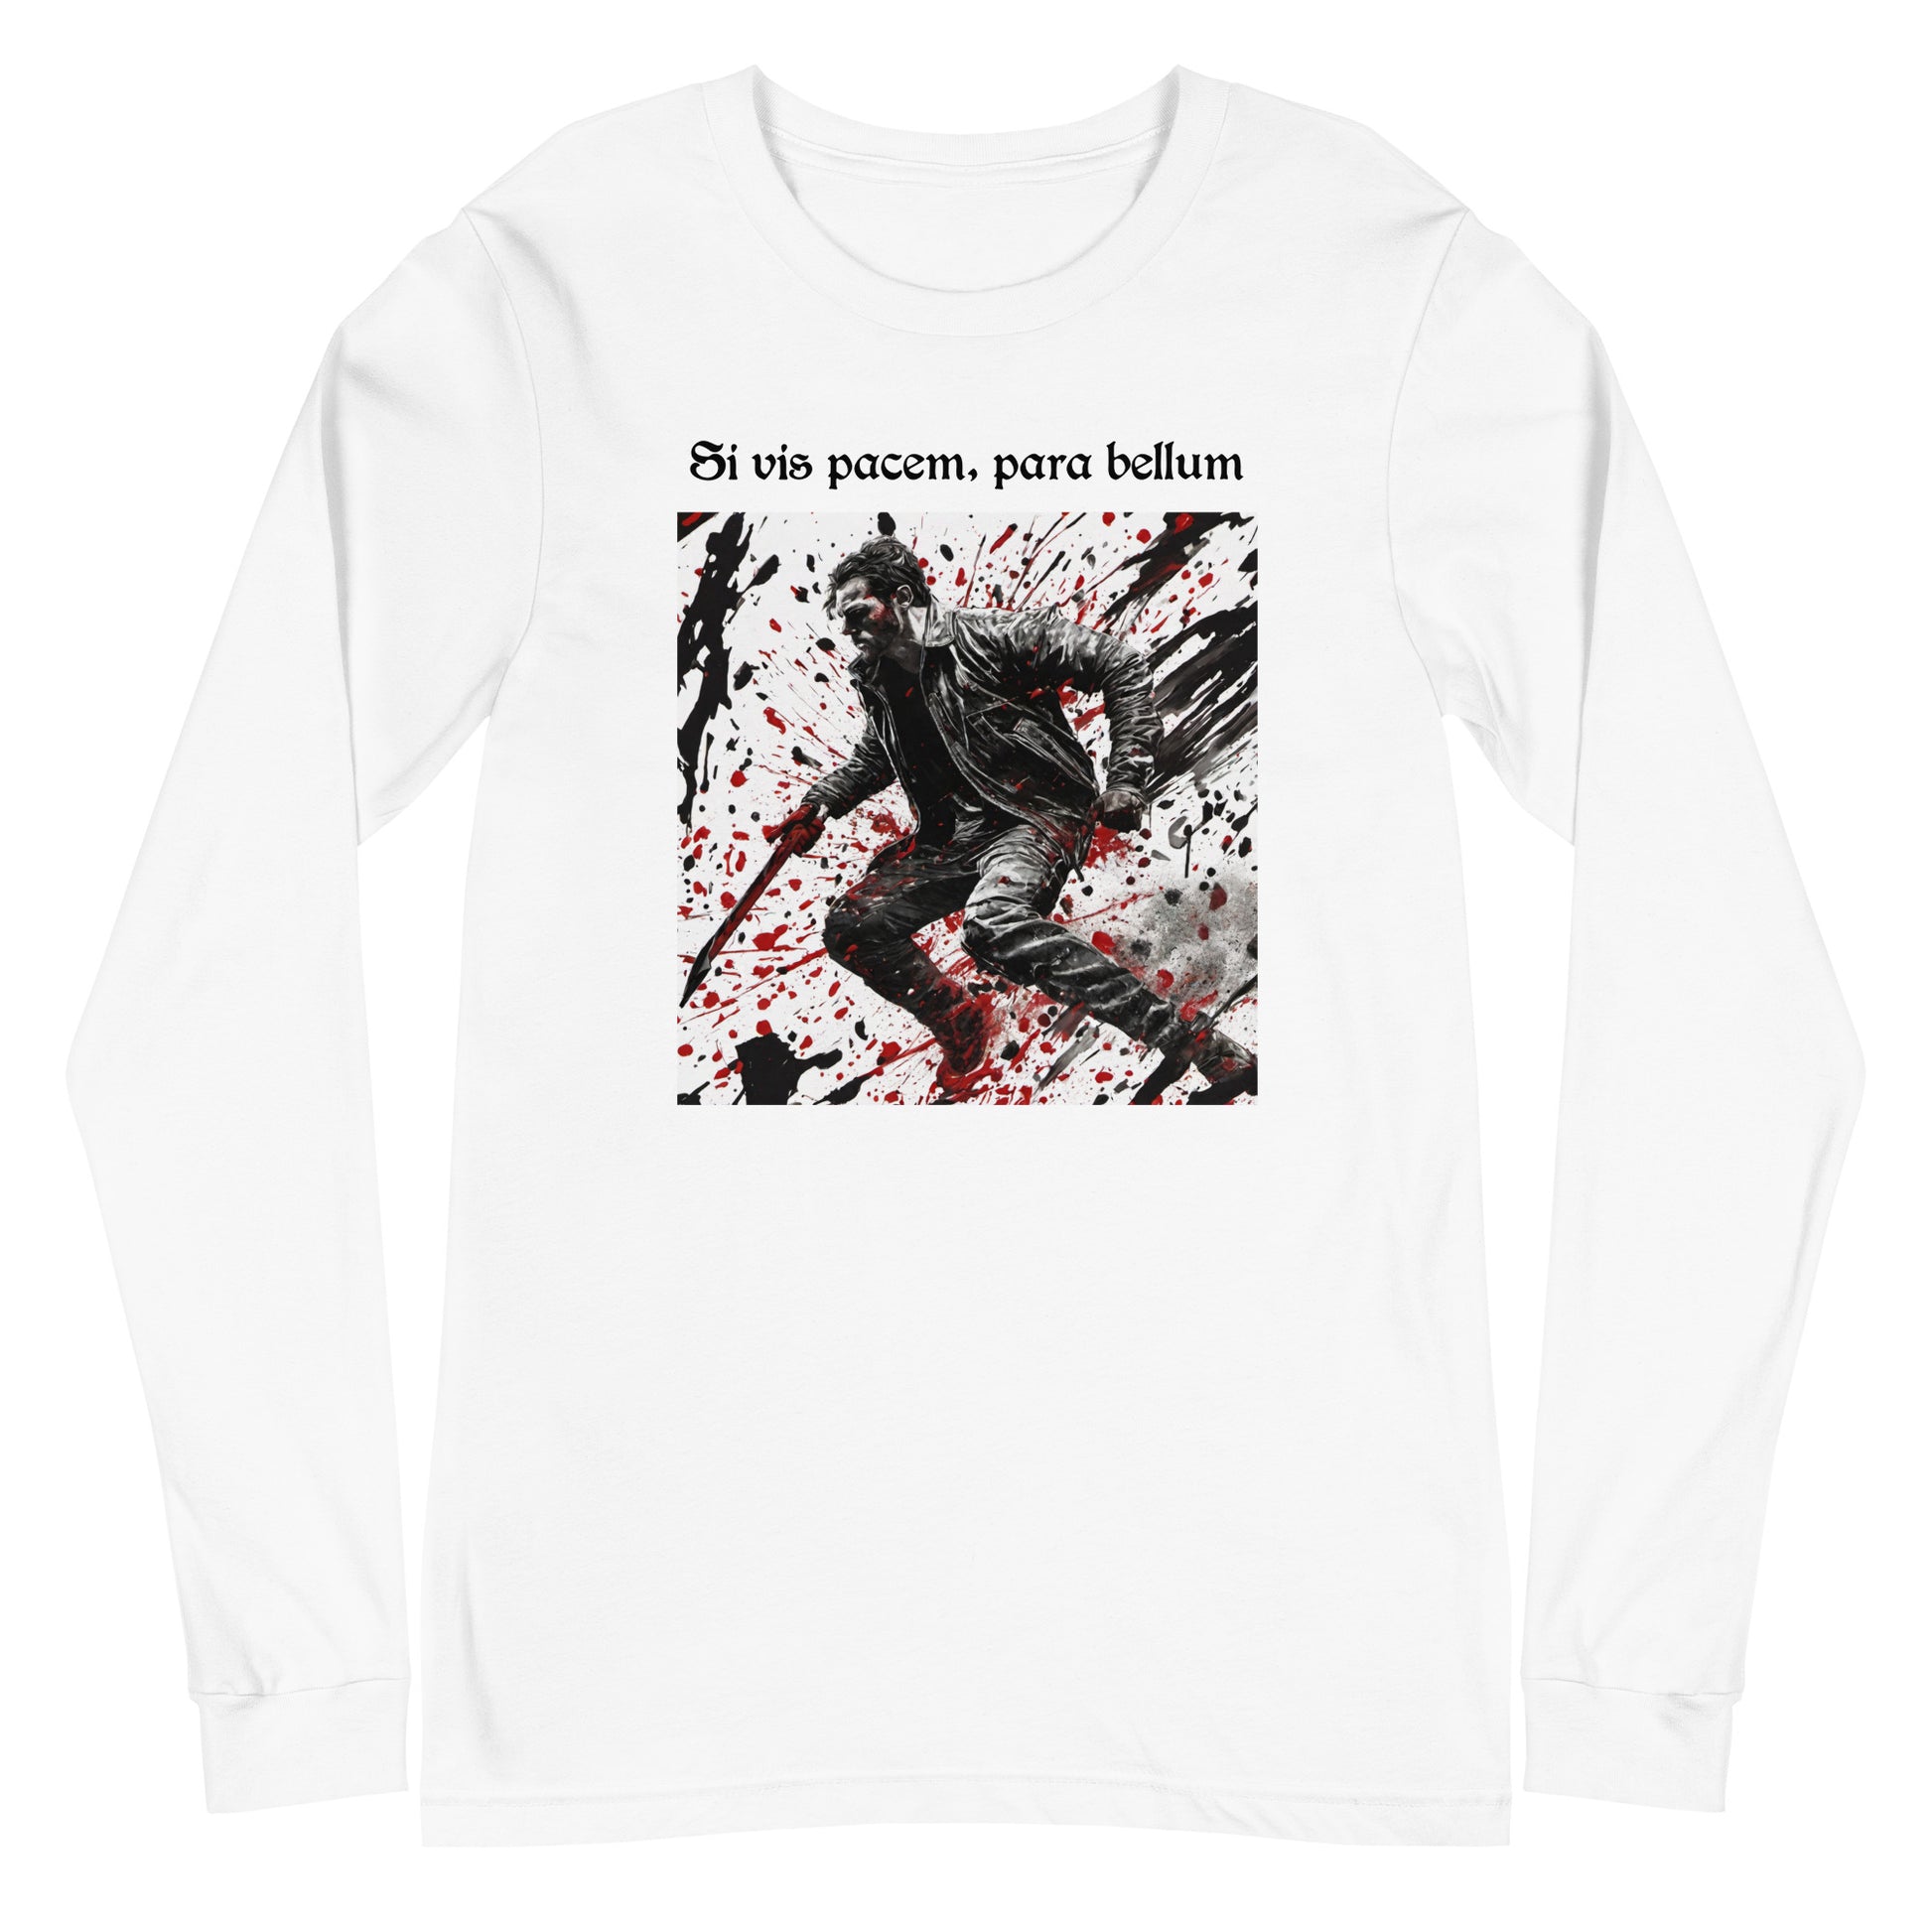 If You Want Peace, Prepare for War Men's Long Sleeve Tee White